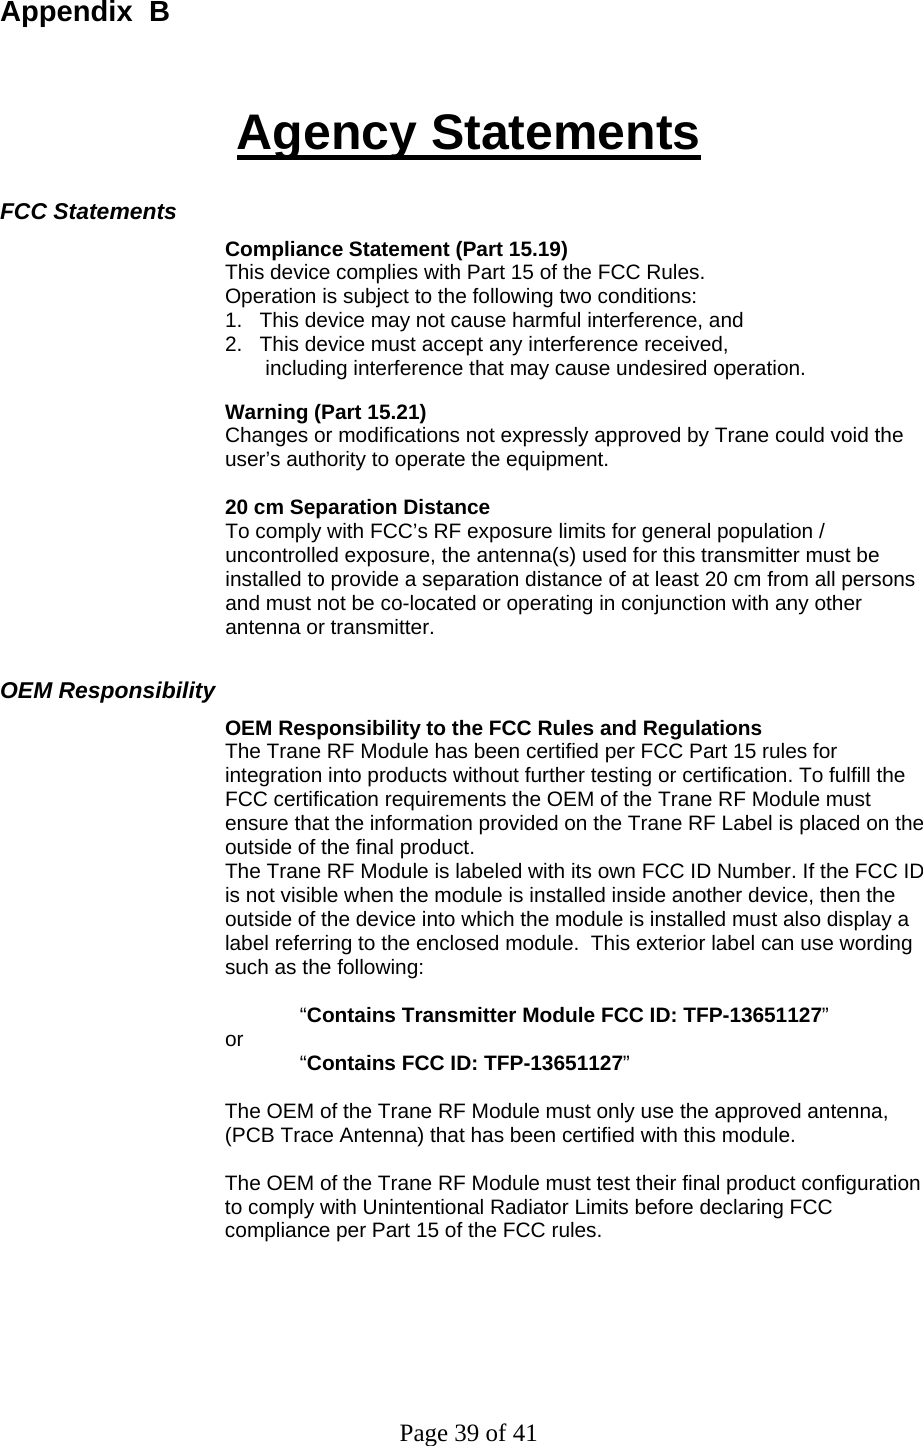 Page 39 of 41 Appendix  B Agency Statements FCC Statements Compliance Statement (Part 15.19) This device complies with Part 15 of the FCC Rules.  Operation is subject to the following two conditions:  1.   This device may not cause harmful interference, and  2.   This device must accept any interference received,         including interference that may cause undesired operation.  Warning (Part 15.21) Changes or modifications not expressly approved by Trane could void the user’s authority to operate the equipment.   20 cm Separation Distance To comply with FCC’s RF exposure limits for general population / uncontrolled exposure, the antenna(s) used for this transmitter must be installed to provide a separation distance of at least 20 cm from all persons and must not be co-located or operating in conjunction with any other antenna or transmitter. OEM Responsibility OEM Responsibility to the FCC Rules and Regulations The Trane RF Module has been certified per FCC Part 15 rules for integration into products without further testing or certification. To fulfill the FCC certification requirements the OEM of the Trane RF Module must ensure that the information provided on the Trane RF Label is placed on the outside of the final product.   The Trane RF Module is labeled with its own FCC ID Number. If the FCC ID is not visible when the module is installed inside another device, then the outside of the device into which the module is installed must also display a label referring to the enclosed module.  This exterior label can use wording such as the following:   “Contains Transmitter Module FCC ID: TFP-13651127” or   “Contains FCC ID: TFP-13651127”   The OEM of the Trane RF Module must only use the approved antenna, (PCB Trace Antenna) that has been certified with this module.  The OEM of the Trane RF Module must test their final product configuration to comply with Unintentional Radiator Limits before declaring FCC compliance per Part 15 of the FCC rules.  